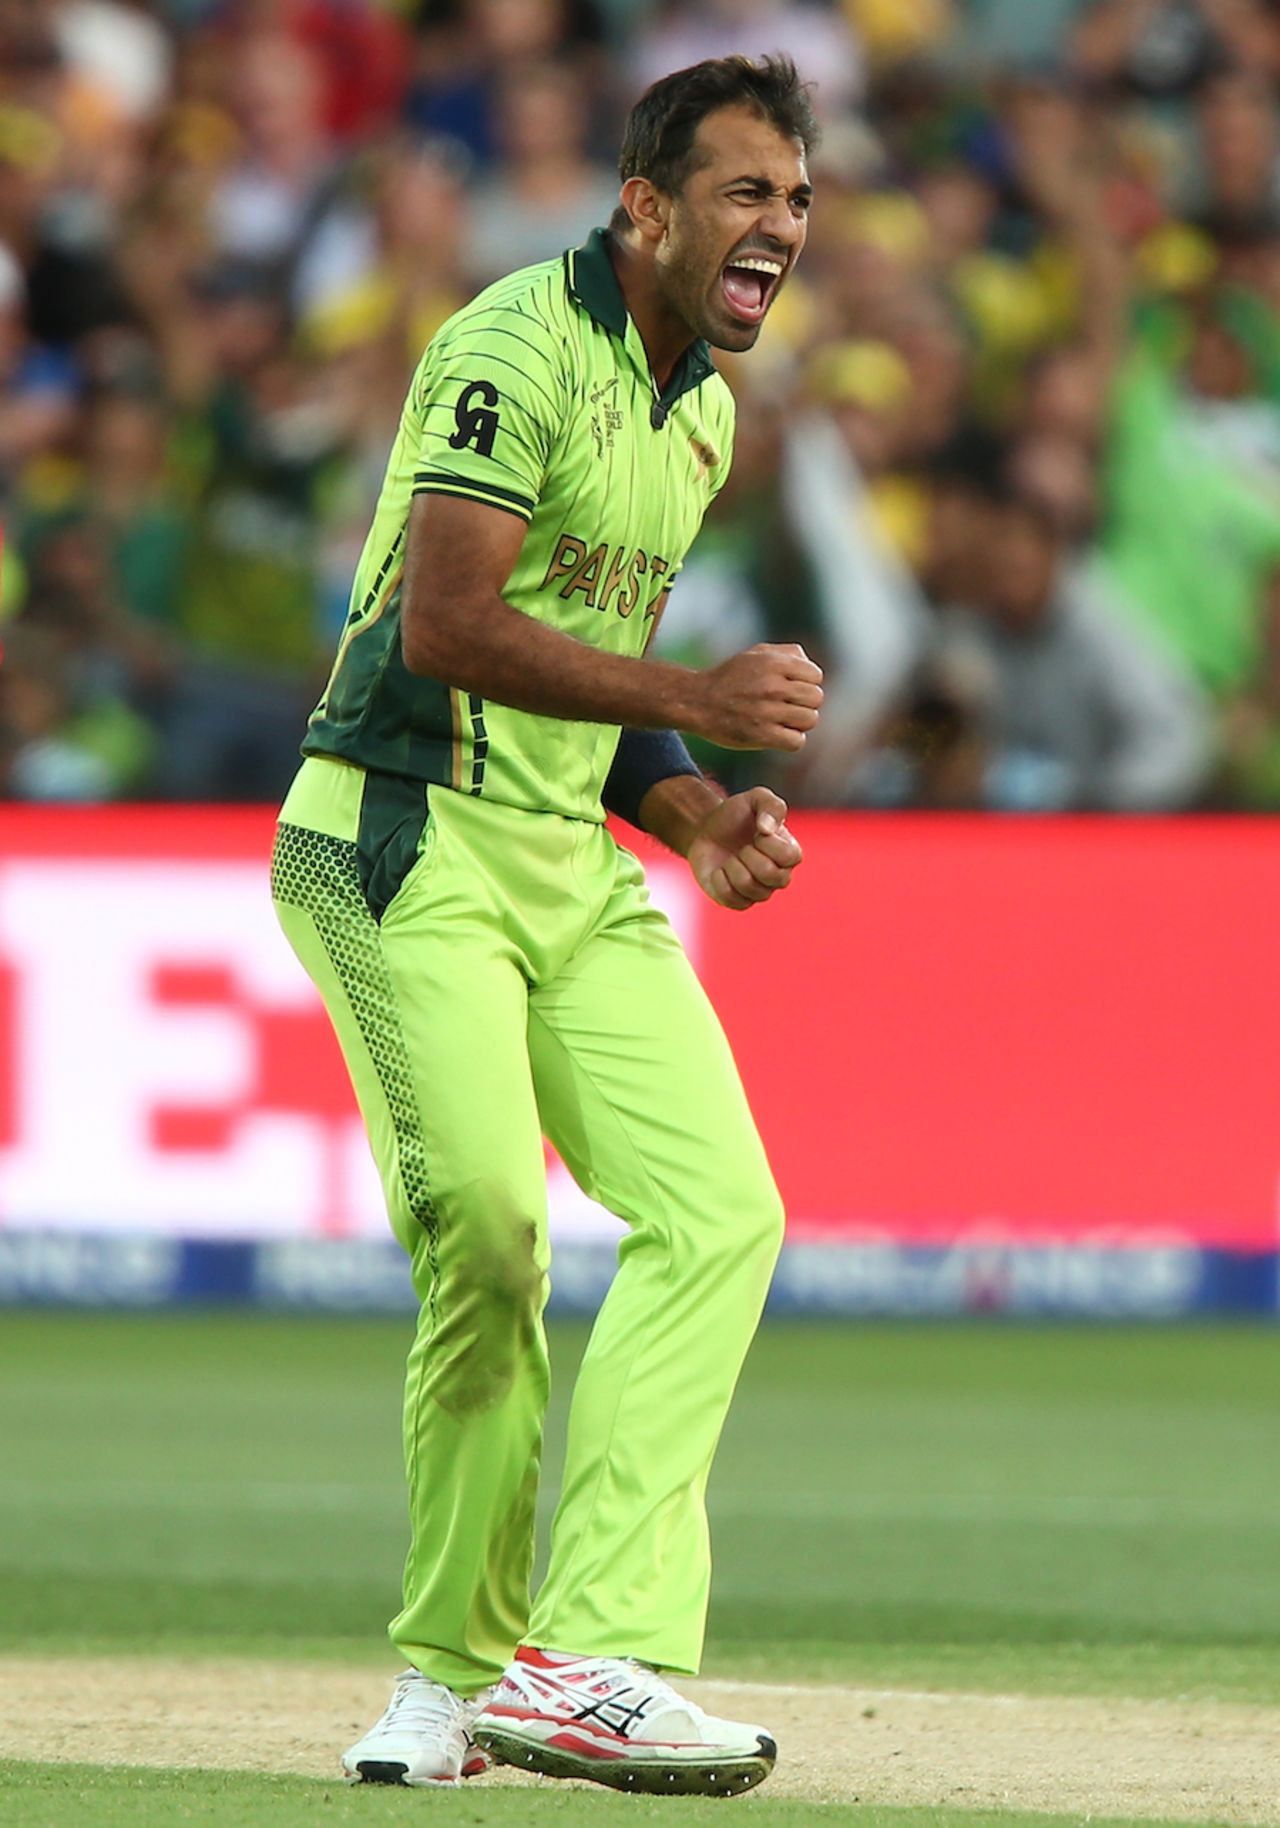 Wahab Riaz is thrilled after taking a wicket, Australia v Pakistan, World Cup 2015, 3rd quarter-final, Adelaide, March 20, 2015